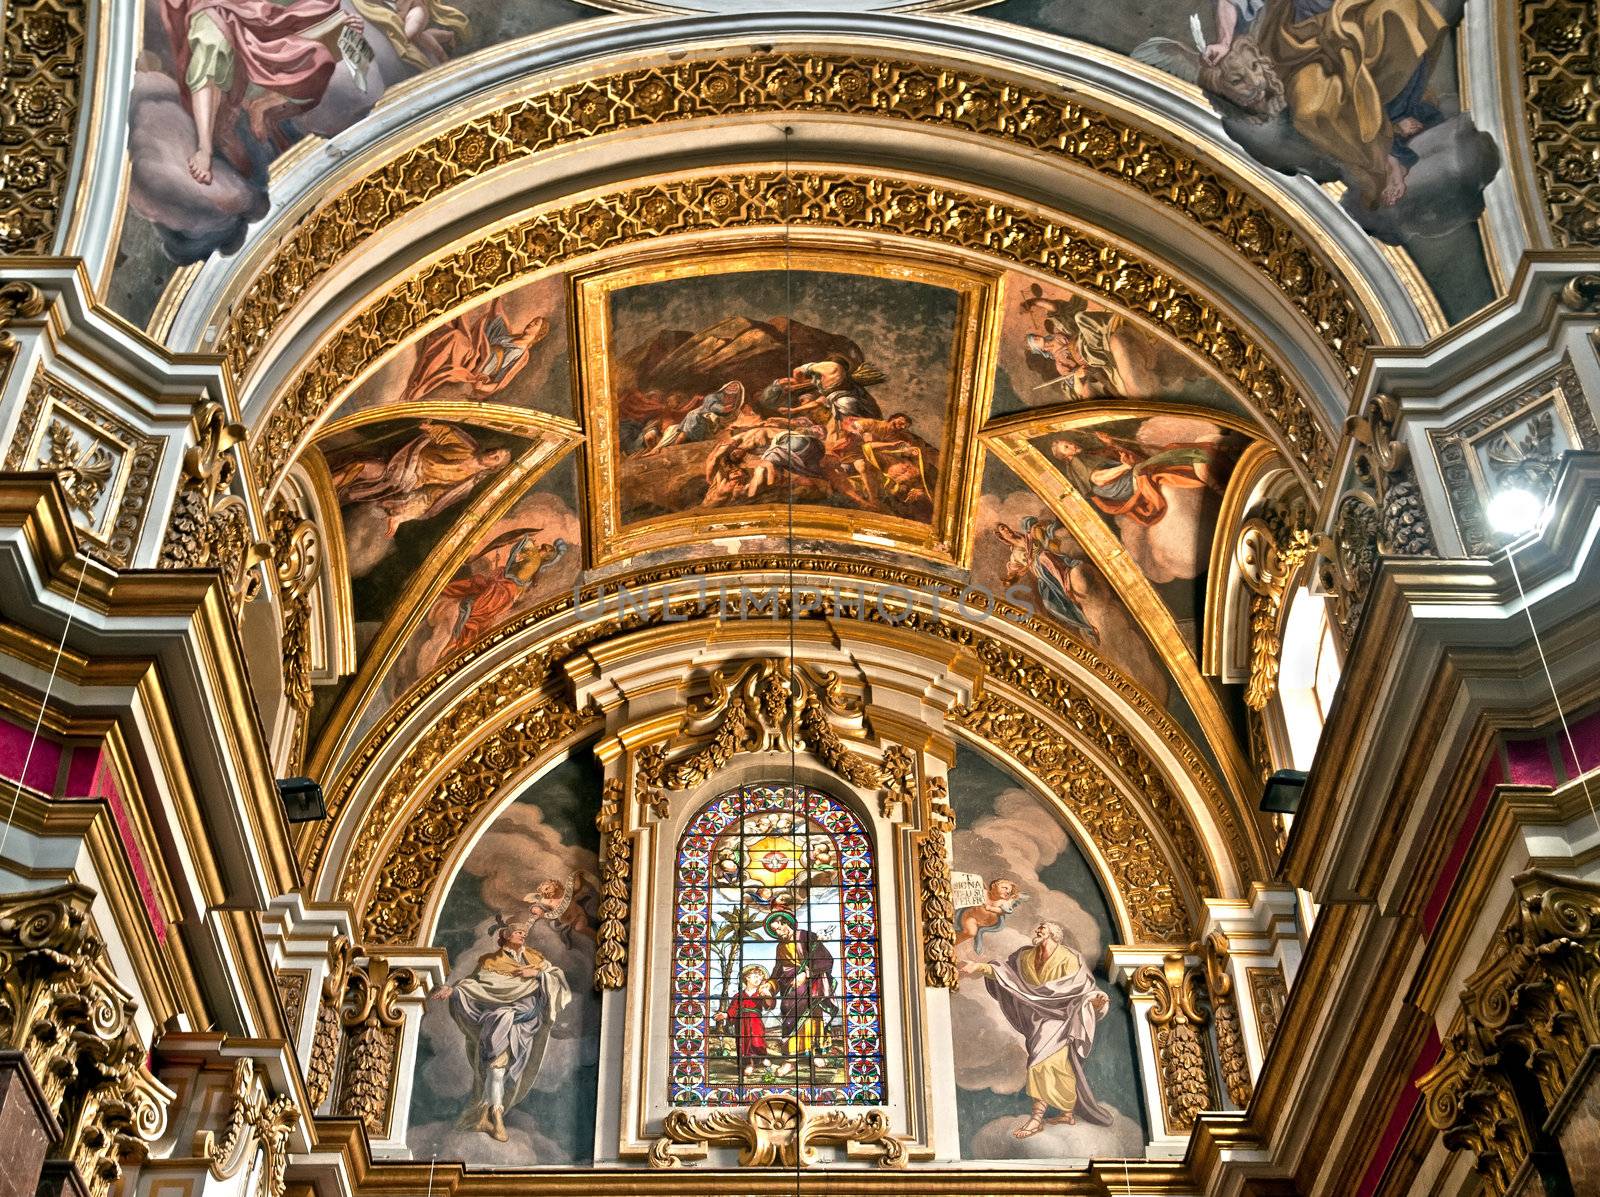 The majestic and beautiful interior of the Cathedral of St. Paul in Mdina in Malta